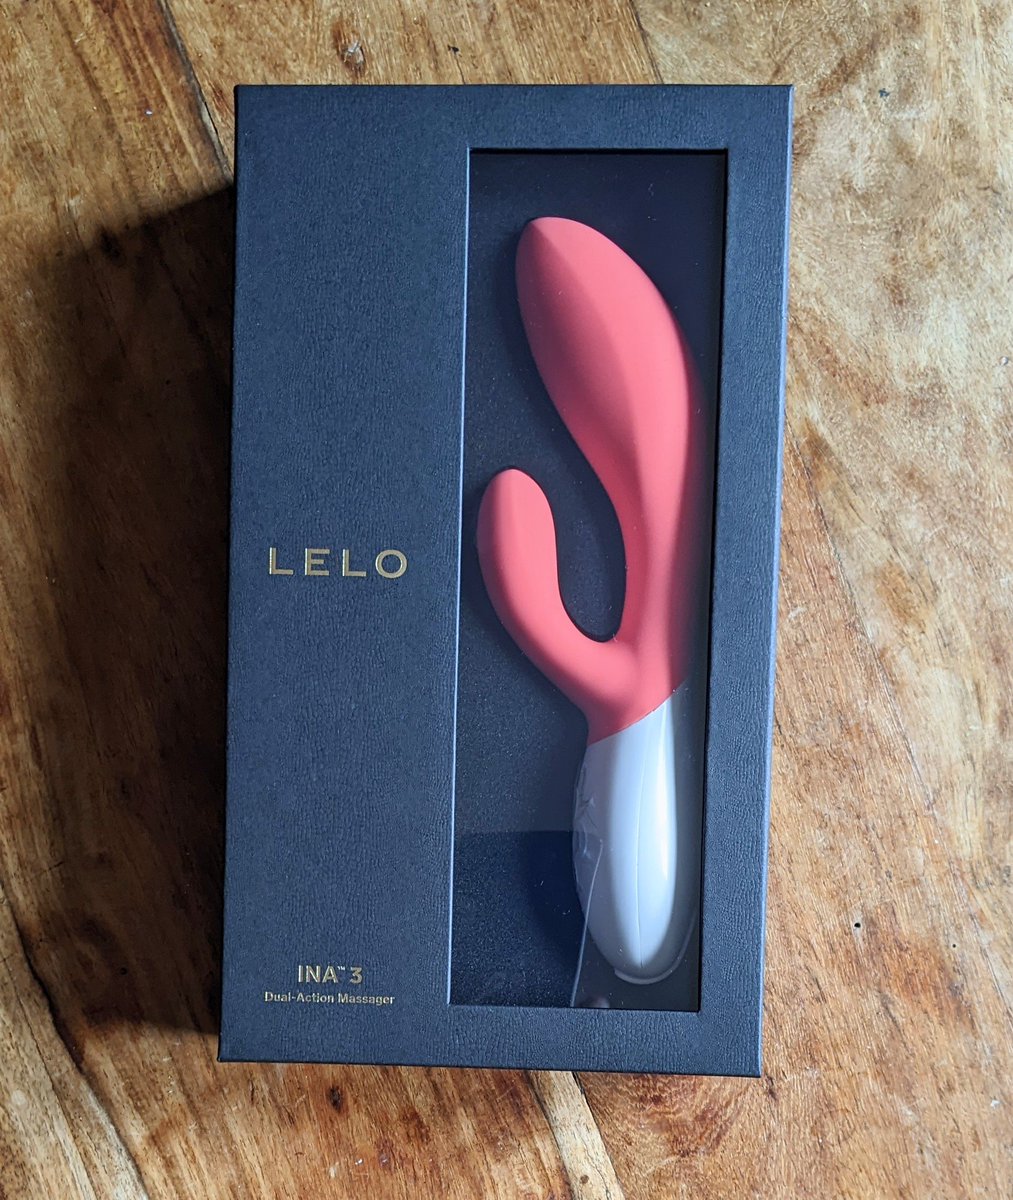 Just delivered @jodivineuk 😊 What better way than to spend a fun afternoon in rainy Kent testing the INA 3 @lelo_official 🥰☔🌧️ #JoDivine #Allpartofthejob #Testing #Pleasure #Fun #LELO